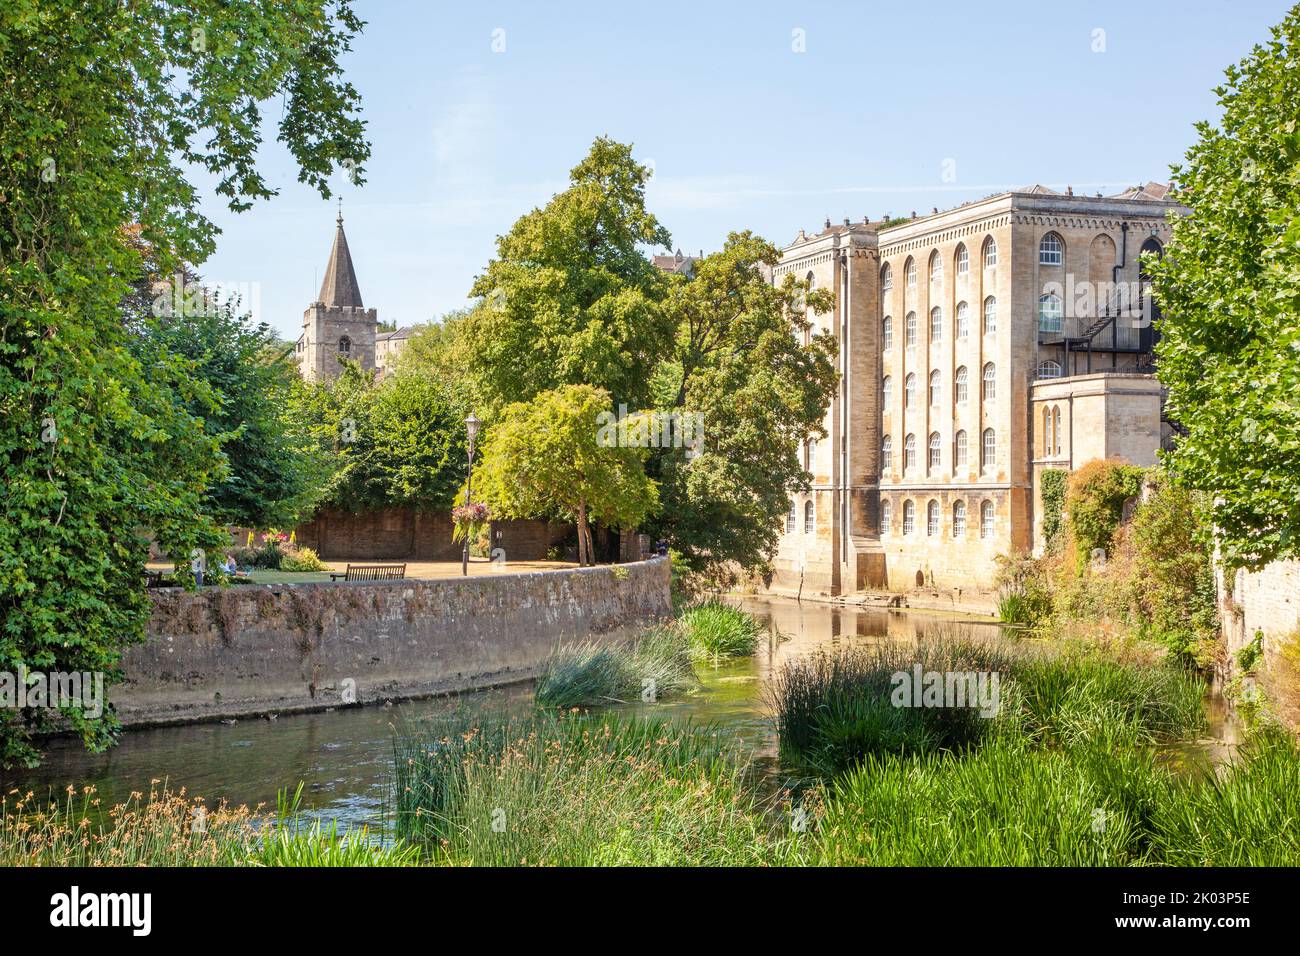 The old Abbey mill on the banks of the river Avon as it flows through the Wiltshire market town of Bradford on Avon Stock Photo